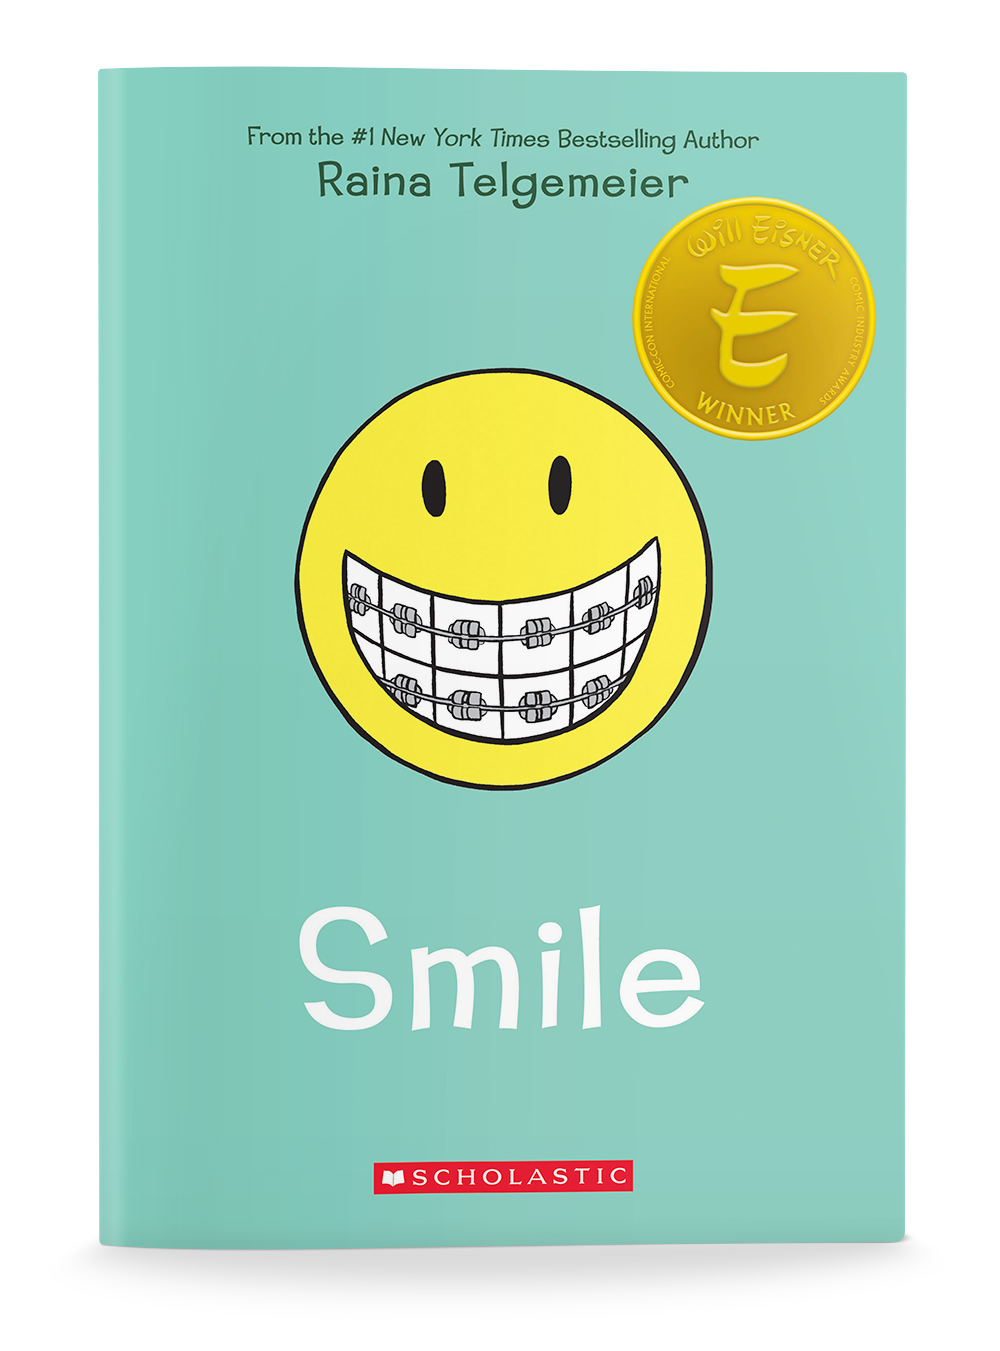 Copy of Smile